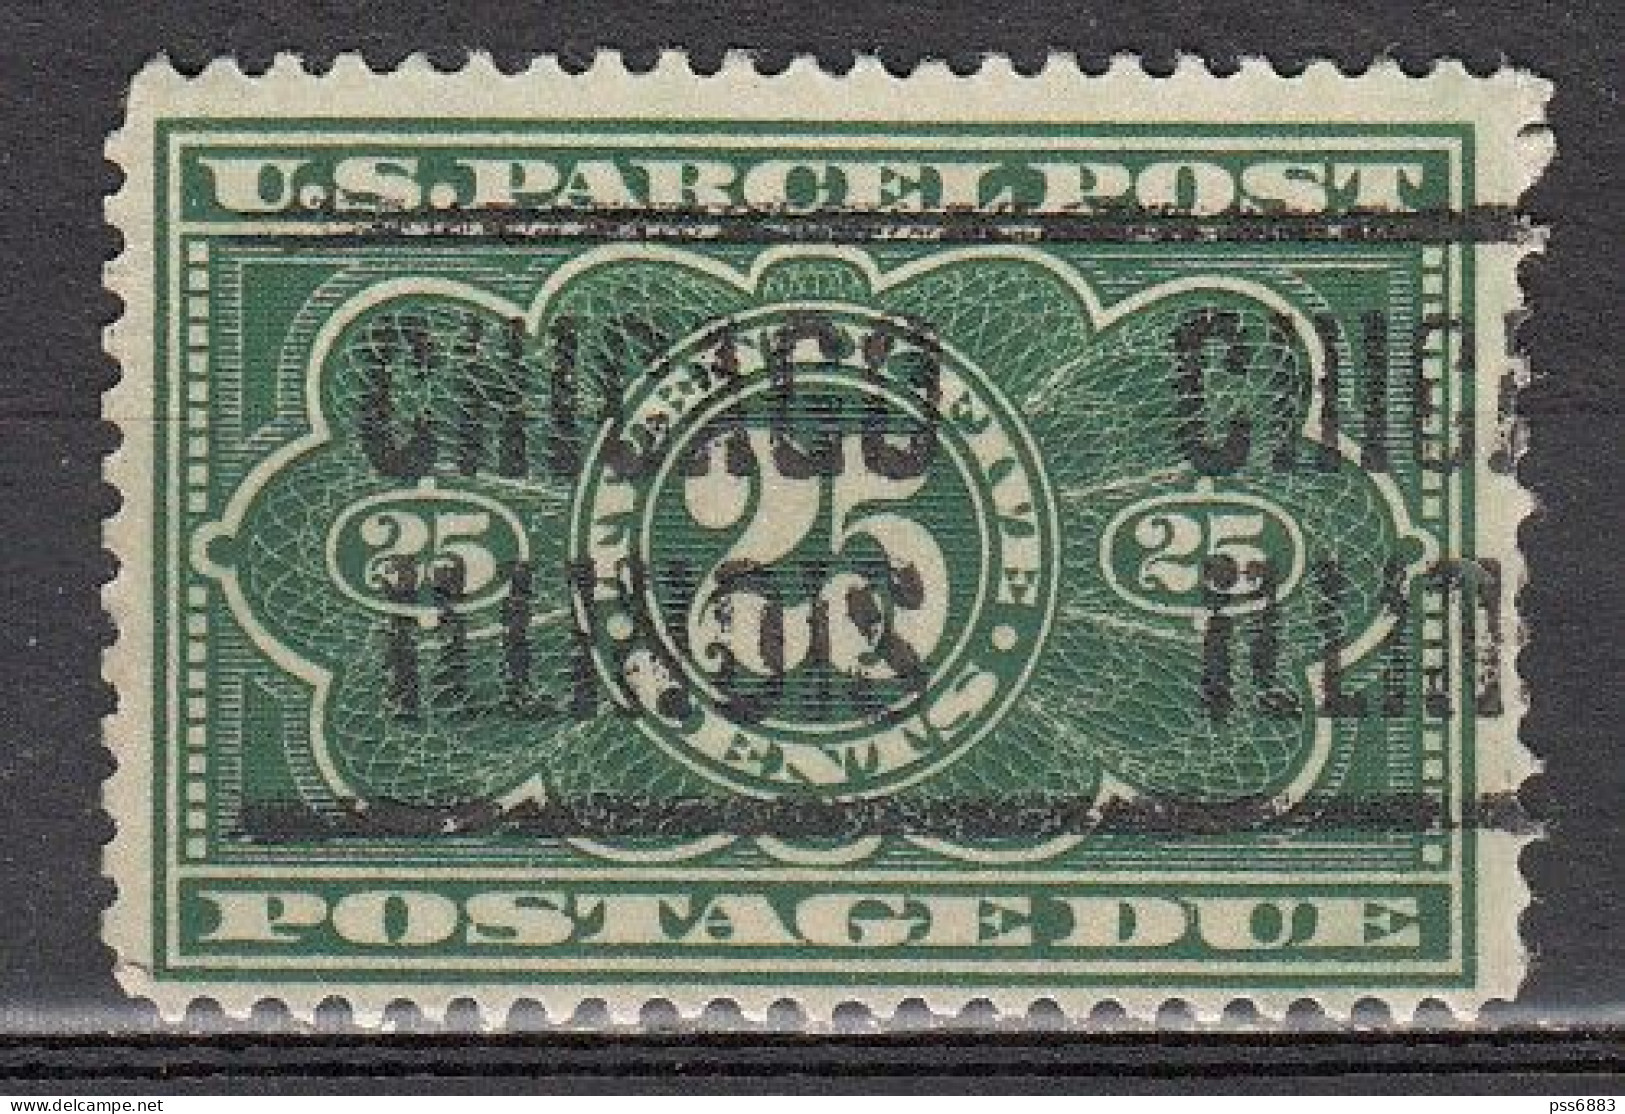 USA LOCAL Precancel/Vorausentwertung/Preo From ILLINOIS - Chicago Type LT-6 E - A Parcel Post Postage Due Stamp - Voorafgestempeld